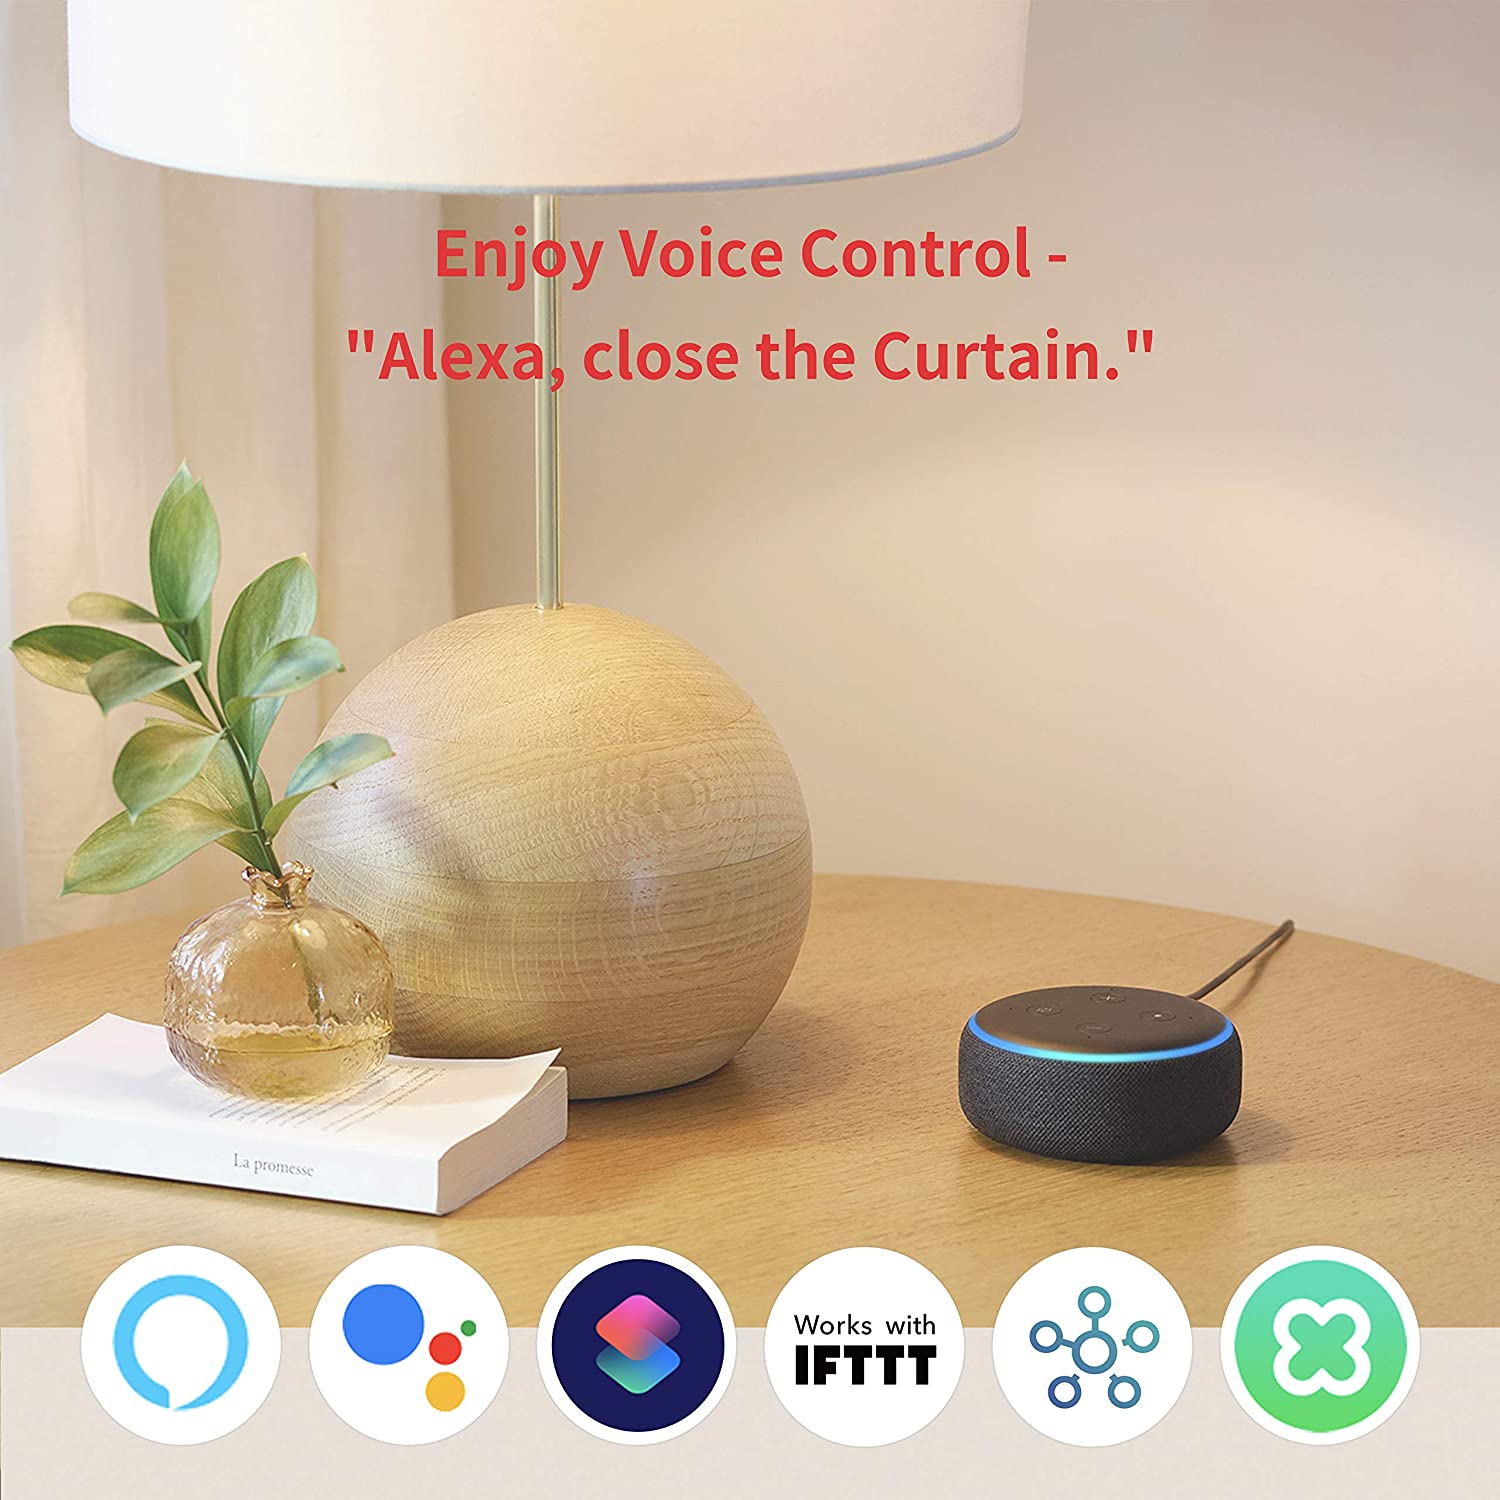 SwitchBot Curtain (I Rail) | Smart Electric Motor - Automate Timer Control Add SwitchBot Hub Mini to Make it Compatible with Alexa, Google Home, IFTTT